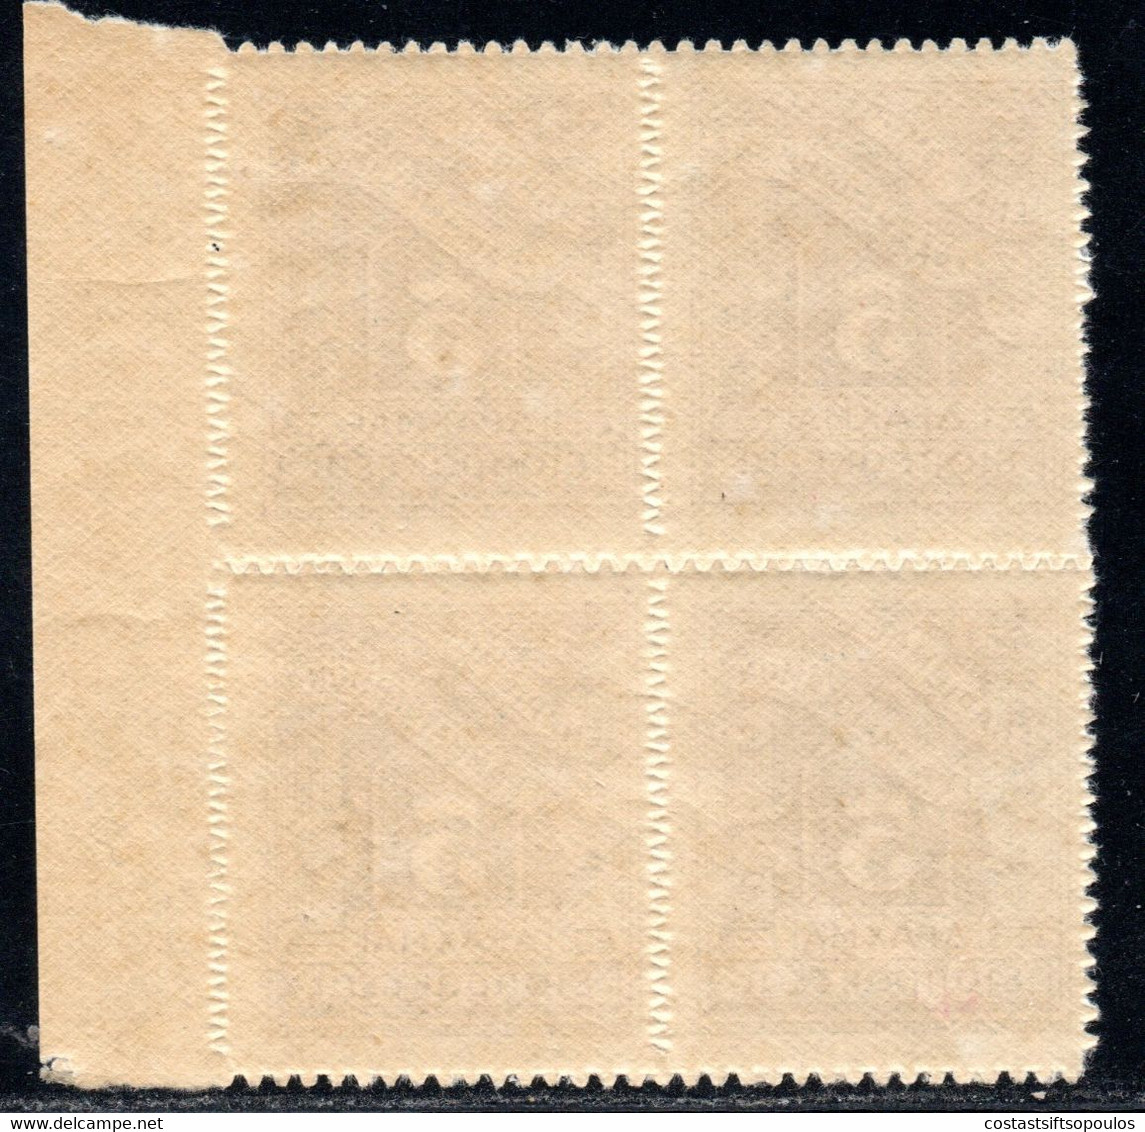 1395. GREECE.1913-1928 POSTAGE DUE. 5 DR. MNH BLOCK OF 4  VERY FINE AND FRESH. - Unused Stamps